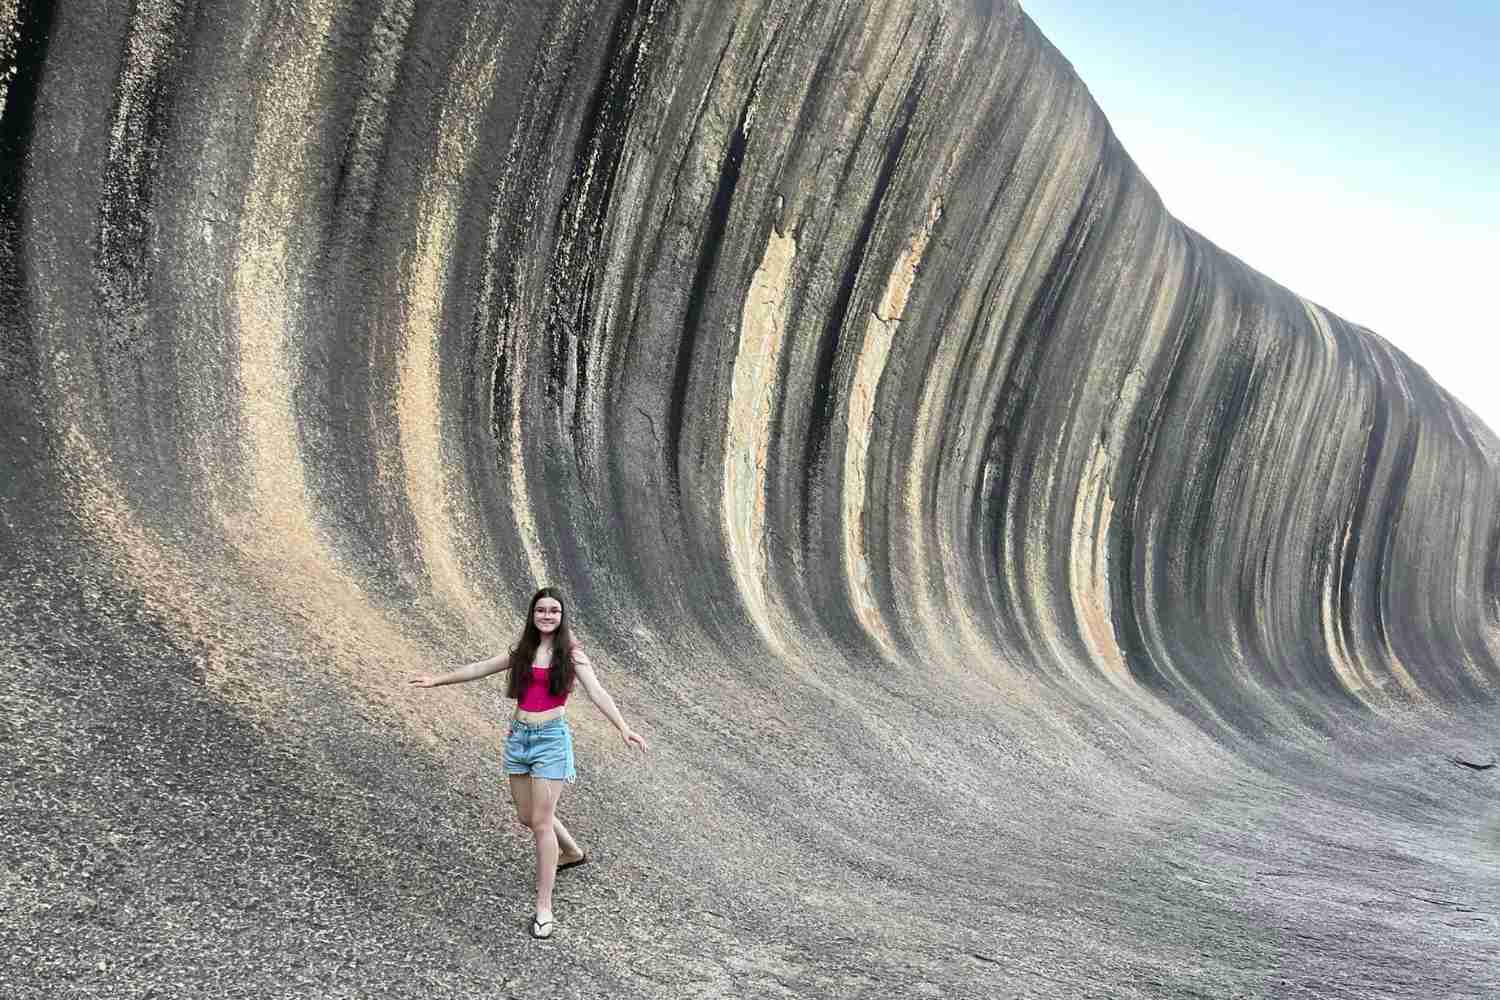 Sunshine appears to be surfing the Wave Rock, a giant rock feature that looks like a giant wave